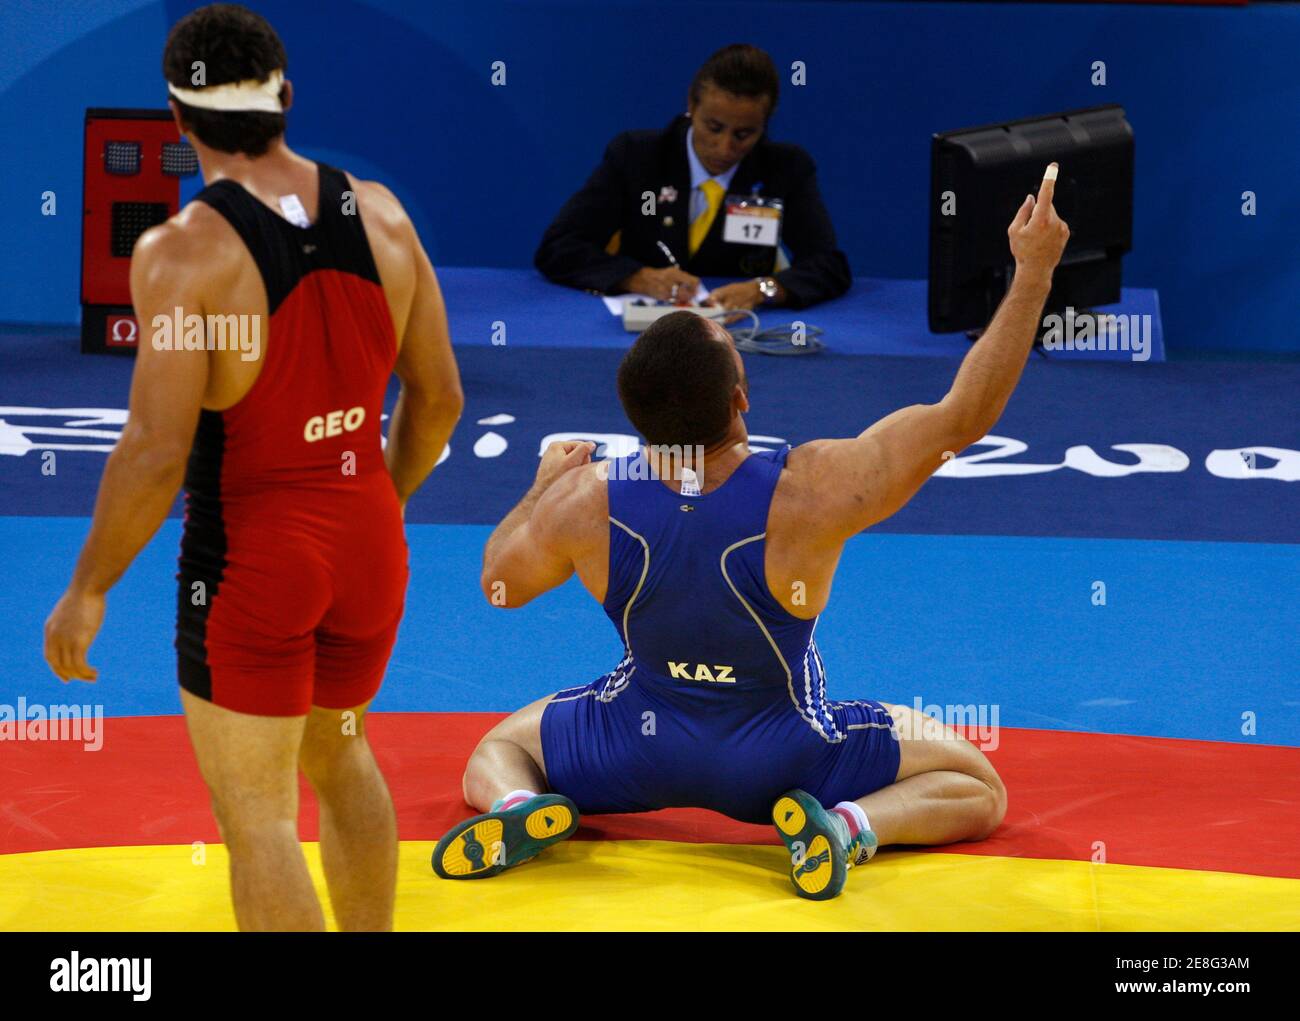 Taimuraz Tigiyev of Kazakhstan (in blue) celebrates his victory against George Gogshelidze of Georgia at the end of their 96kg men's freestyle wrestling semi-final match at the Beijing 2008 Olympic Games August 21, 2008. REUTERS/Oleg Popov (CHINA) Stock Photo